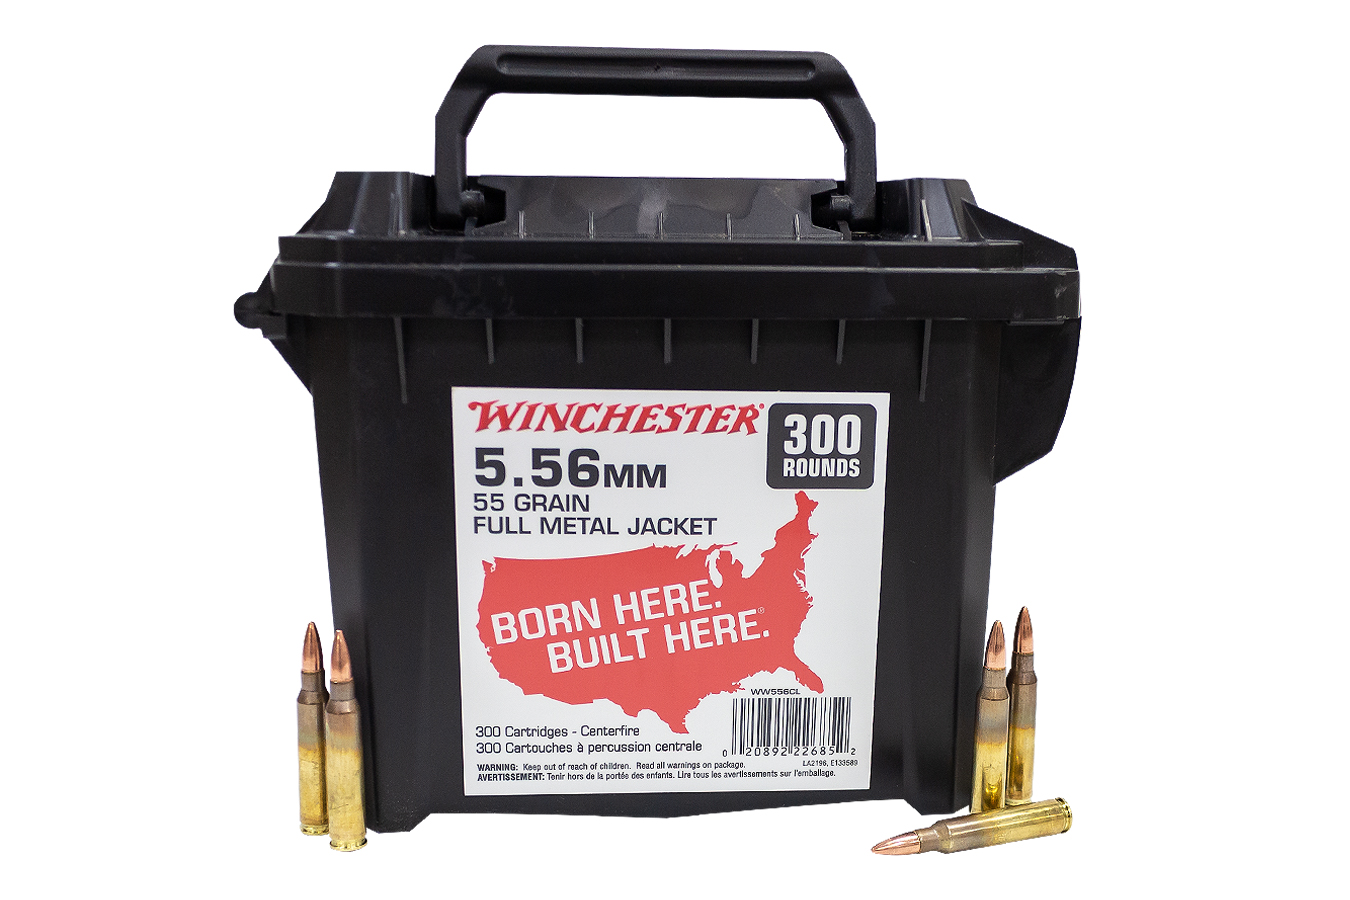 5.56MM 55 GR FMJ AMMO CAN 300 RD